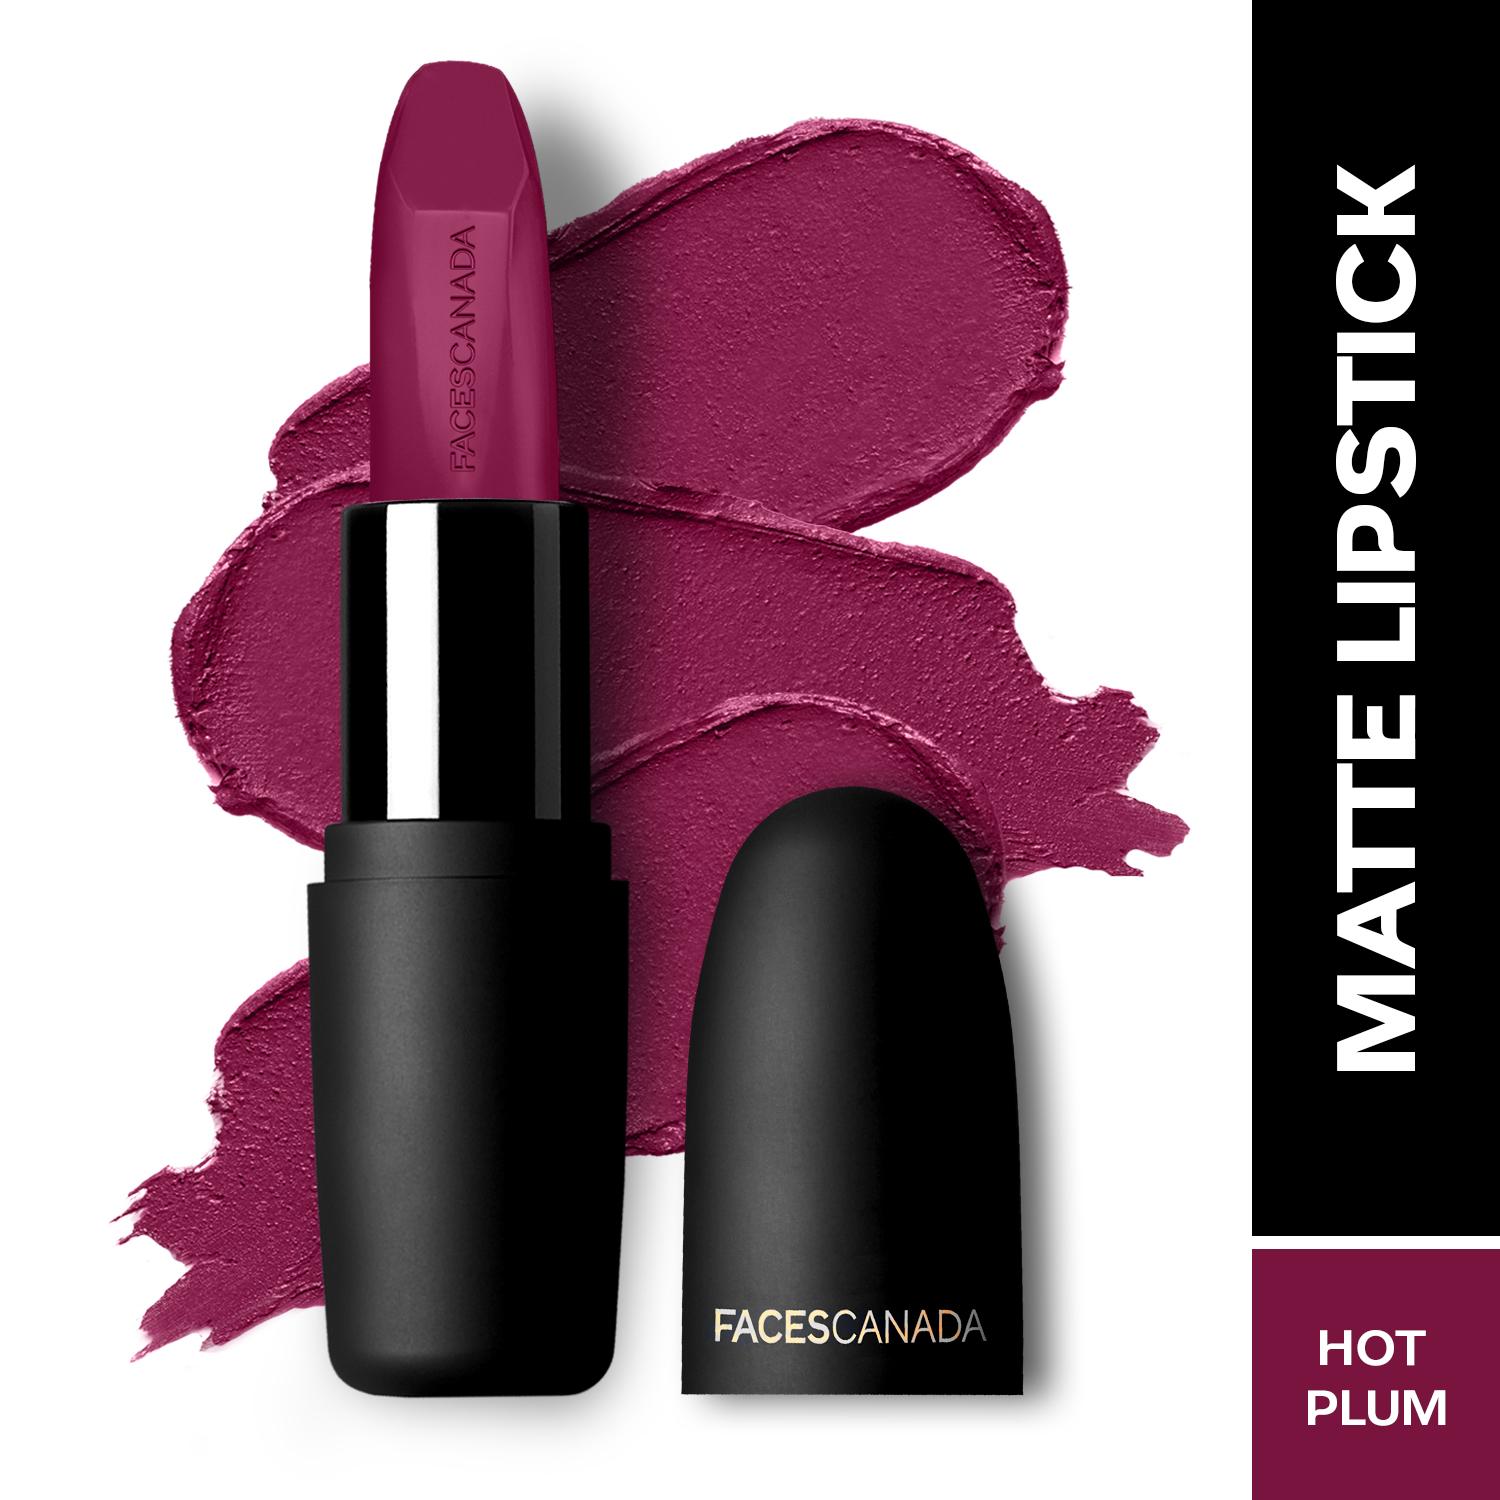 Faces Canada Weightless Matte Lipstick, Pigmented and Hydrated Lips - Hot Plum 24 (4.5 g)